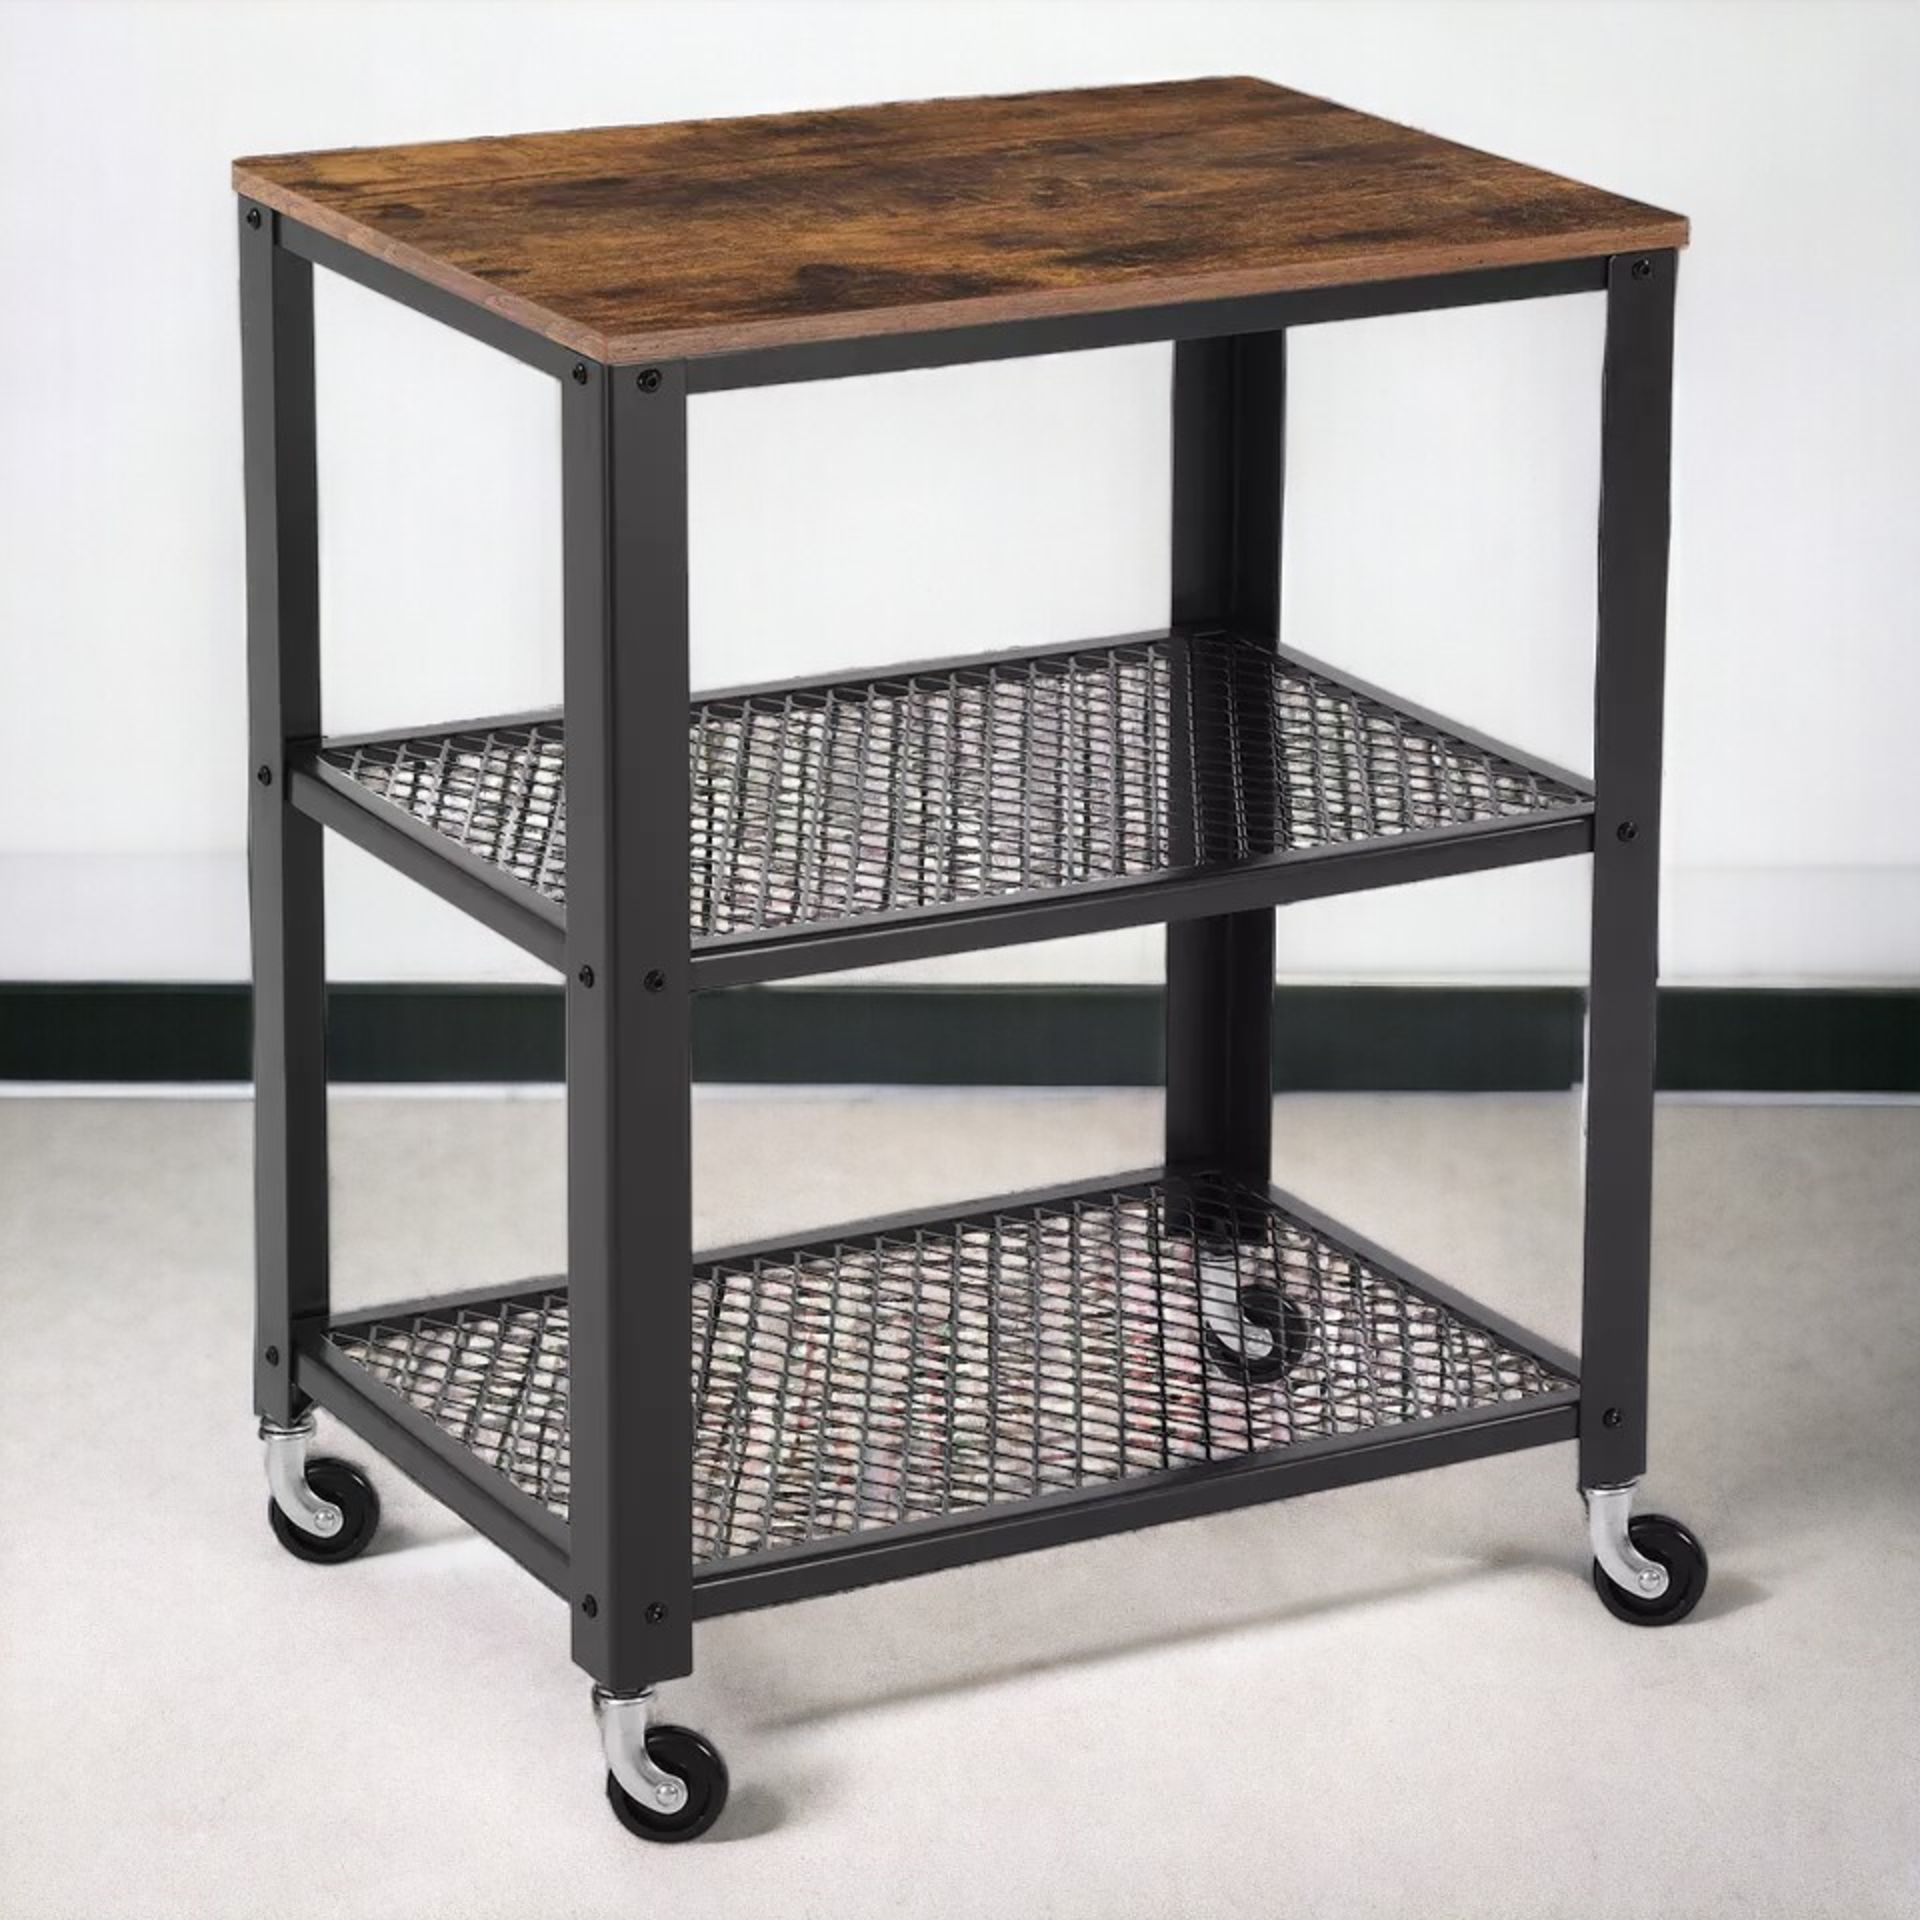 FREE DELIVERY - BRAND NEW 3-TIER KITCHEN CART TROLLEY ROLLING UTILITY CART, HEAVY STORAGE